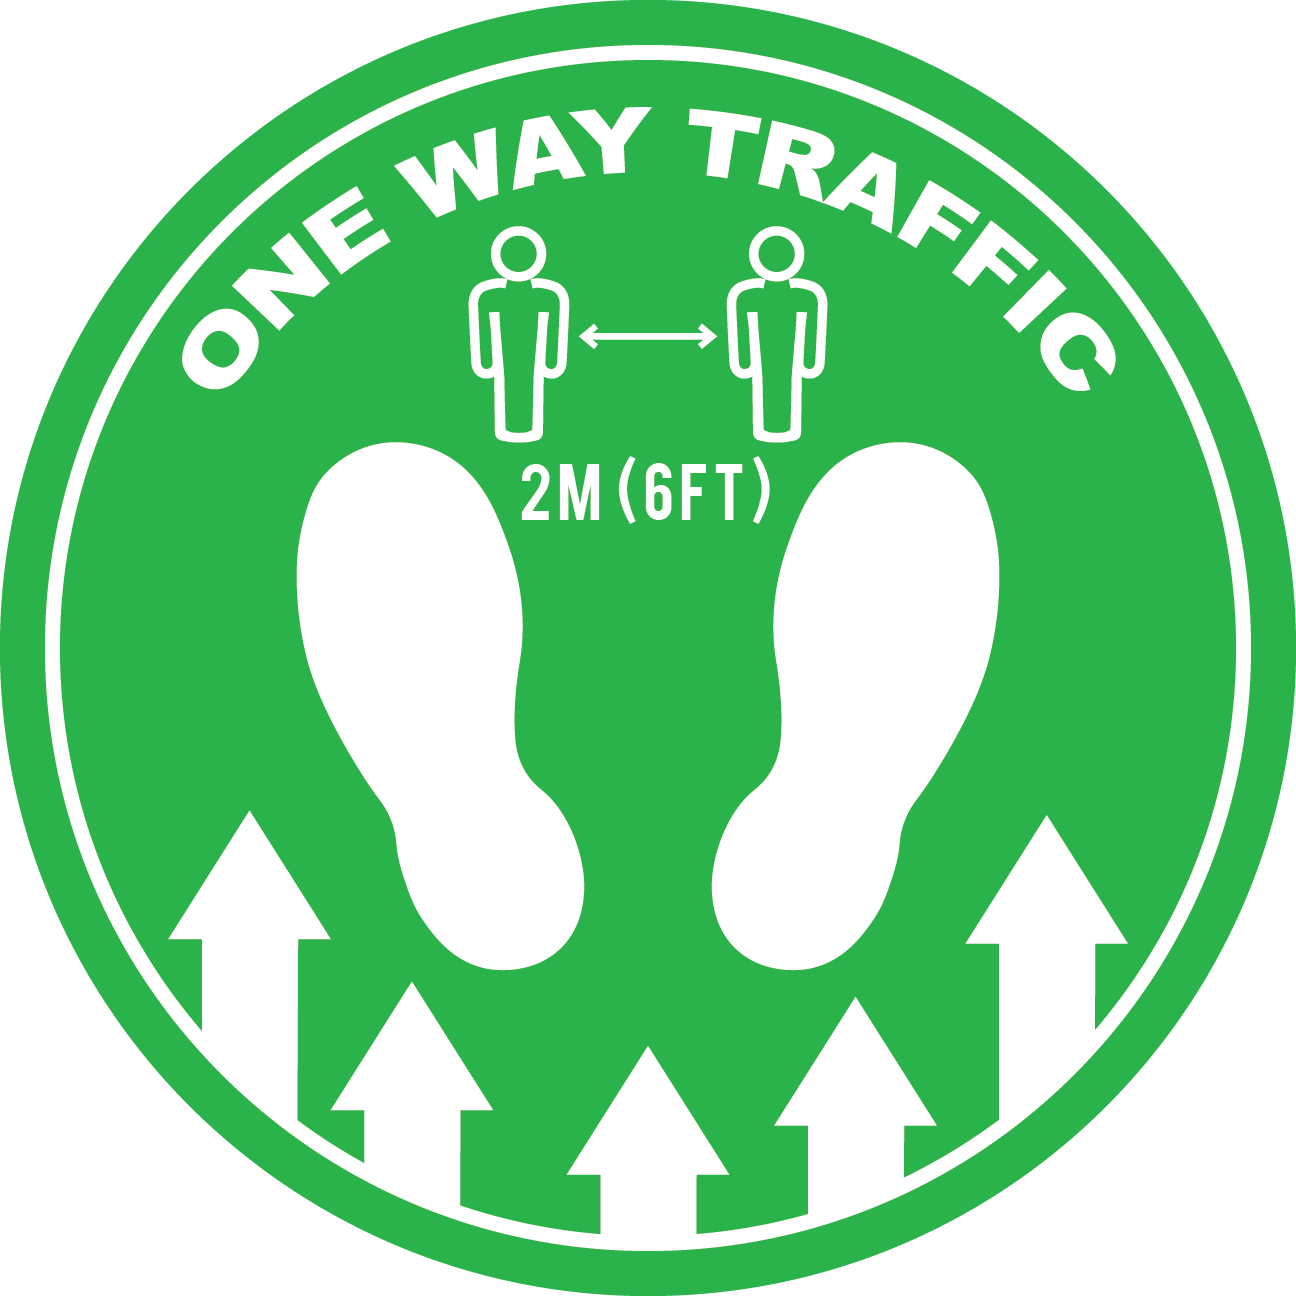 Social Distancing - One Way Traffic - Floor Sign - CYANvisuals